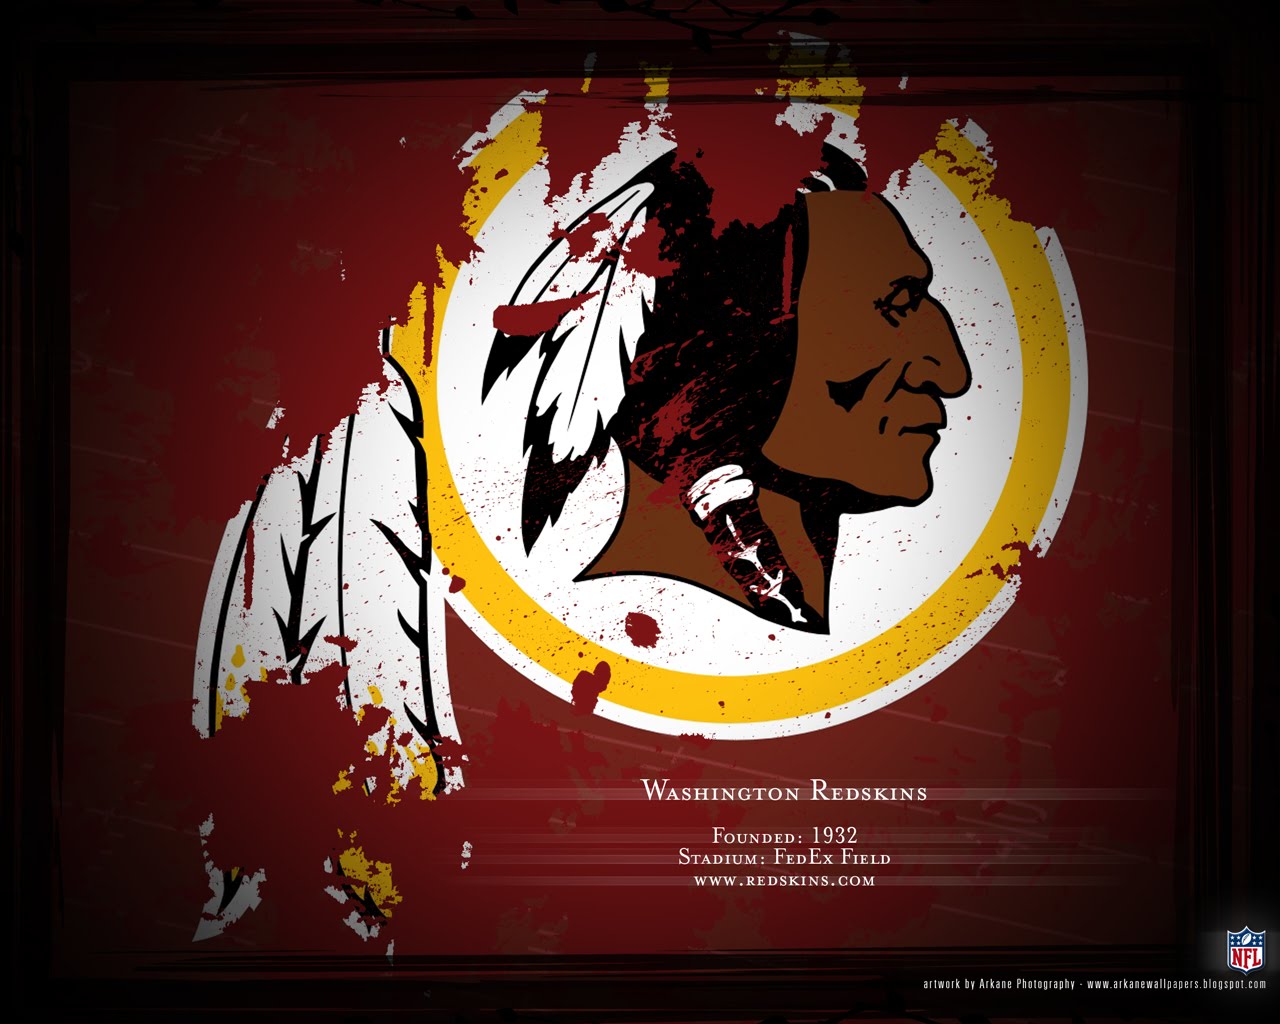 Download 'Washington Redskins' wallpapers for mobile phone, free